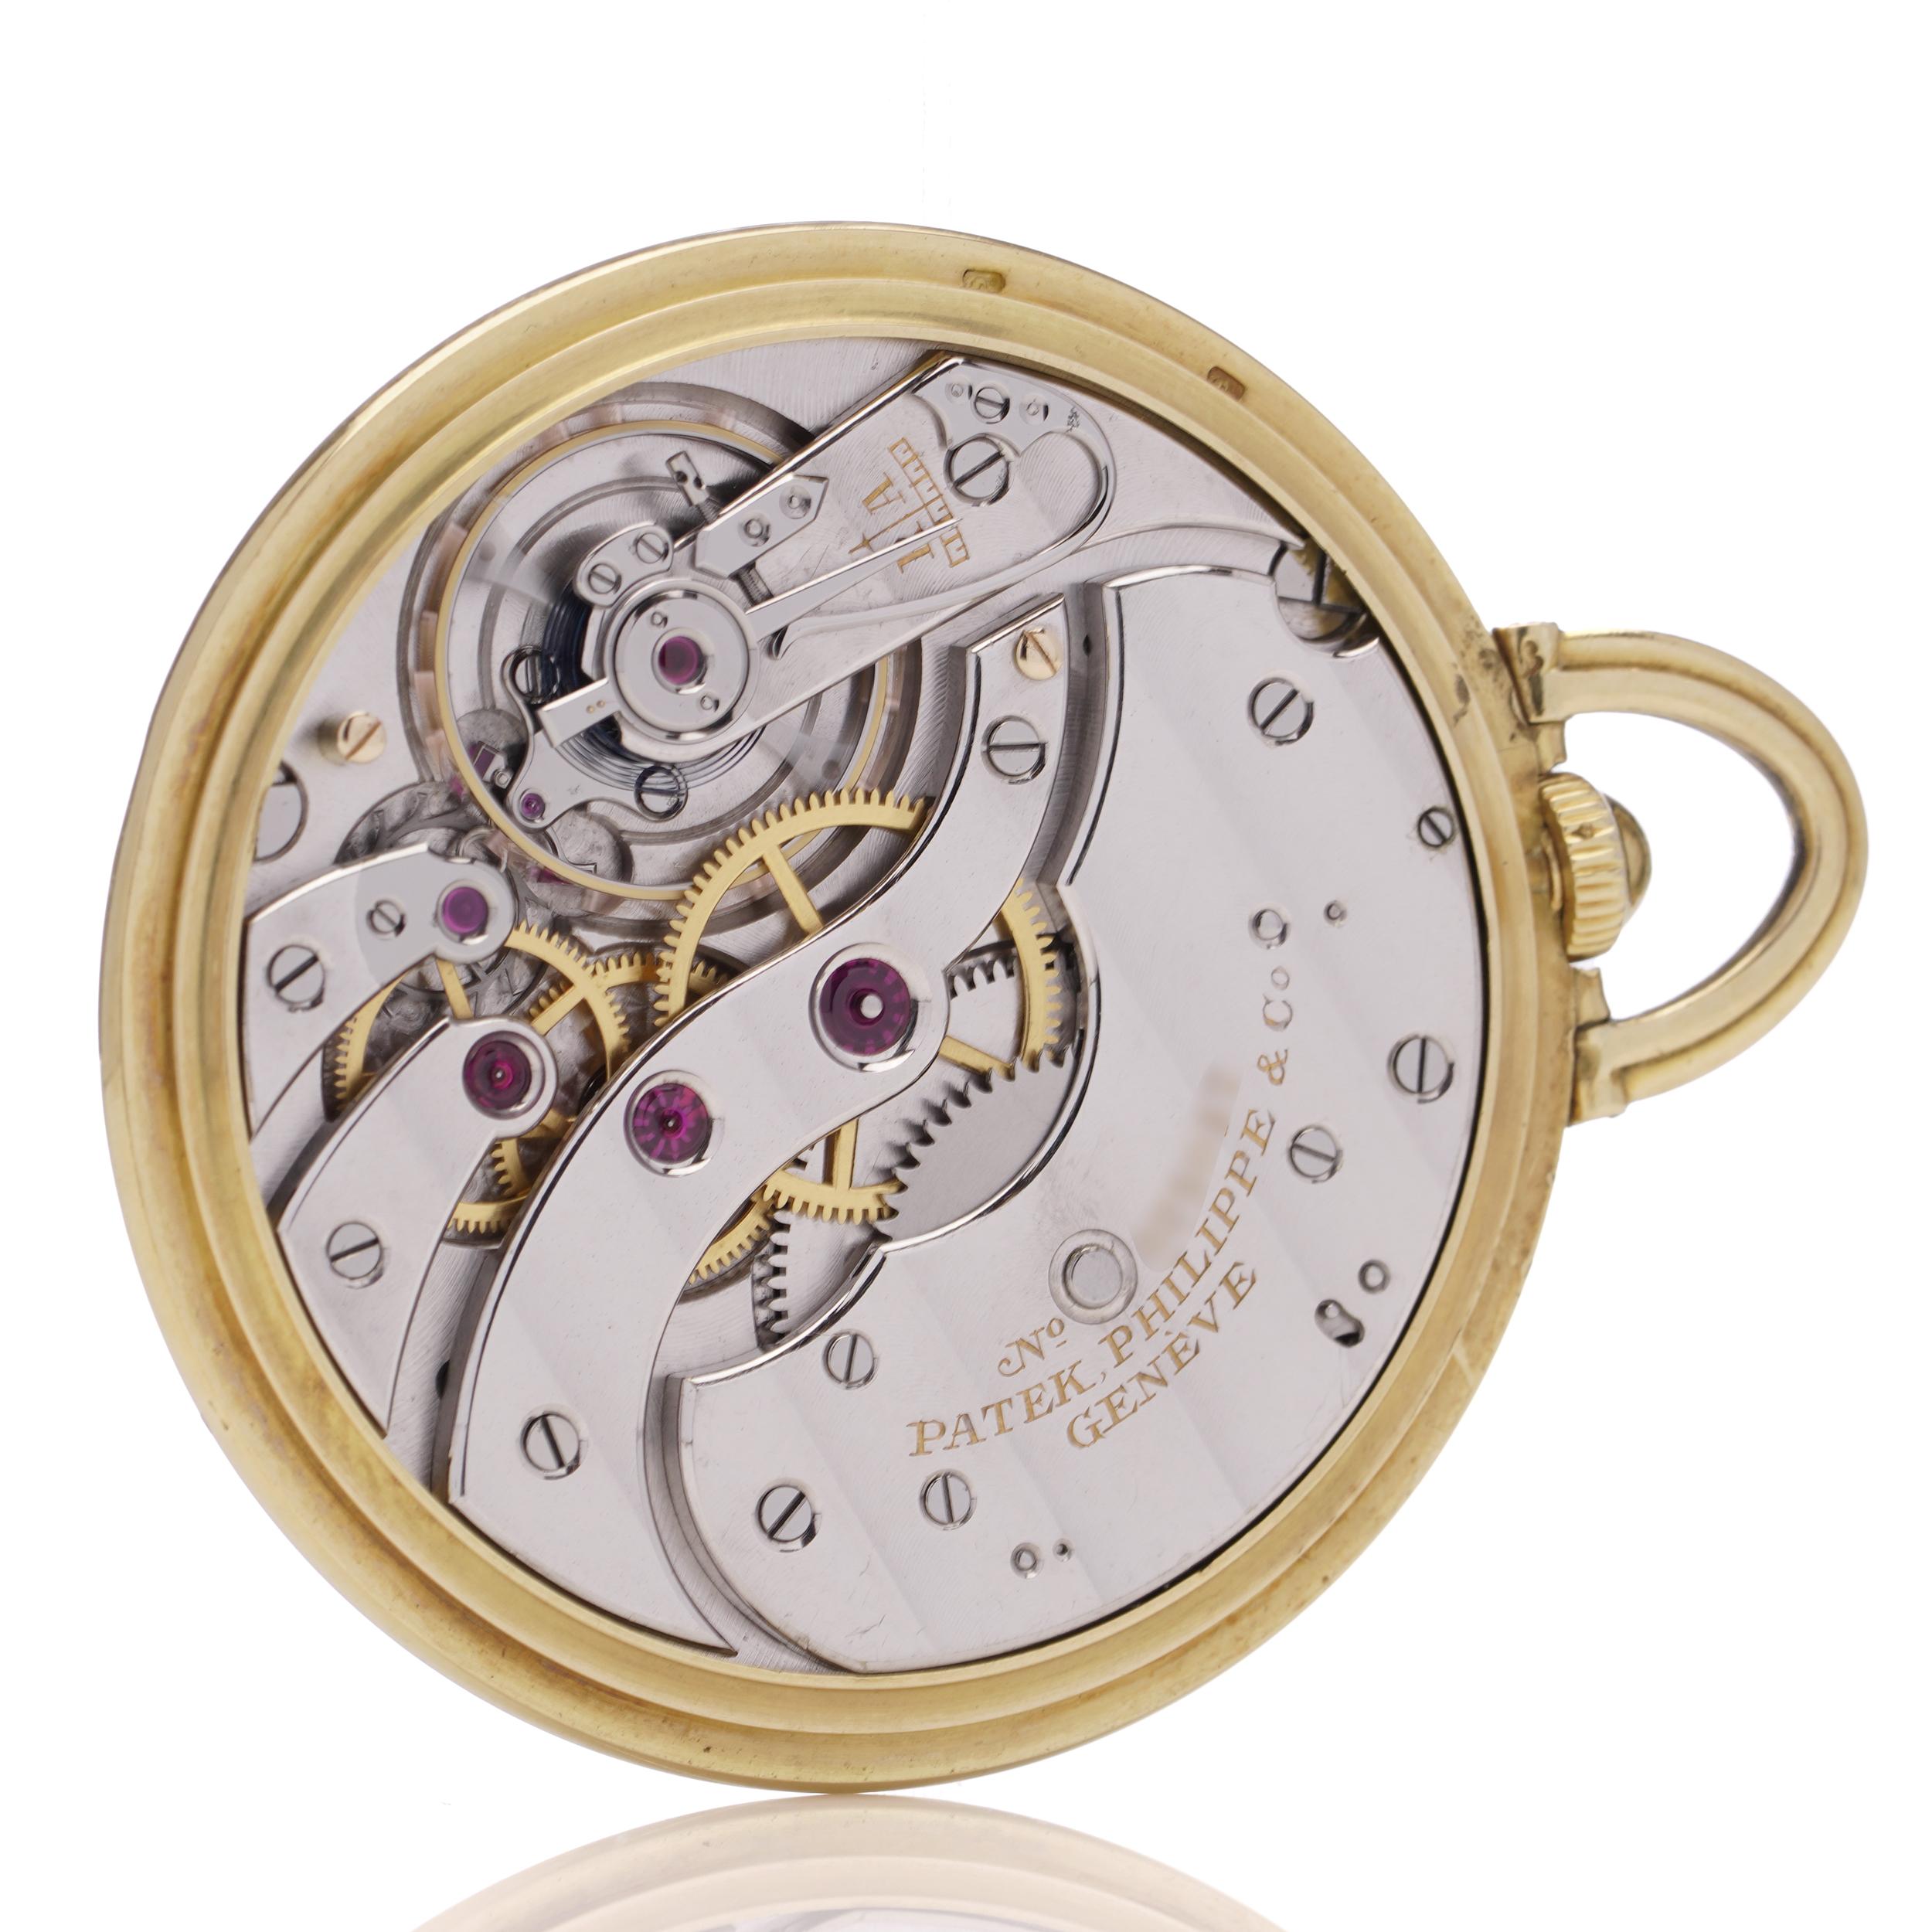 Patek Philippe Art Deco period  18kt. yellow gold open-face pocket watch For Sale 2